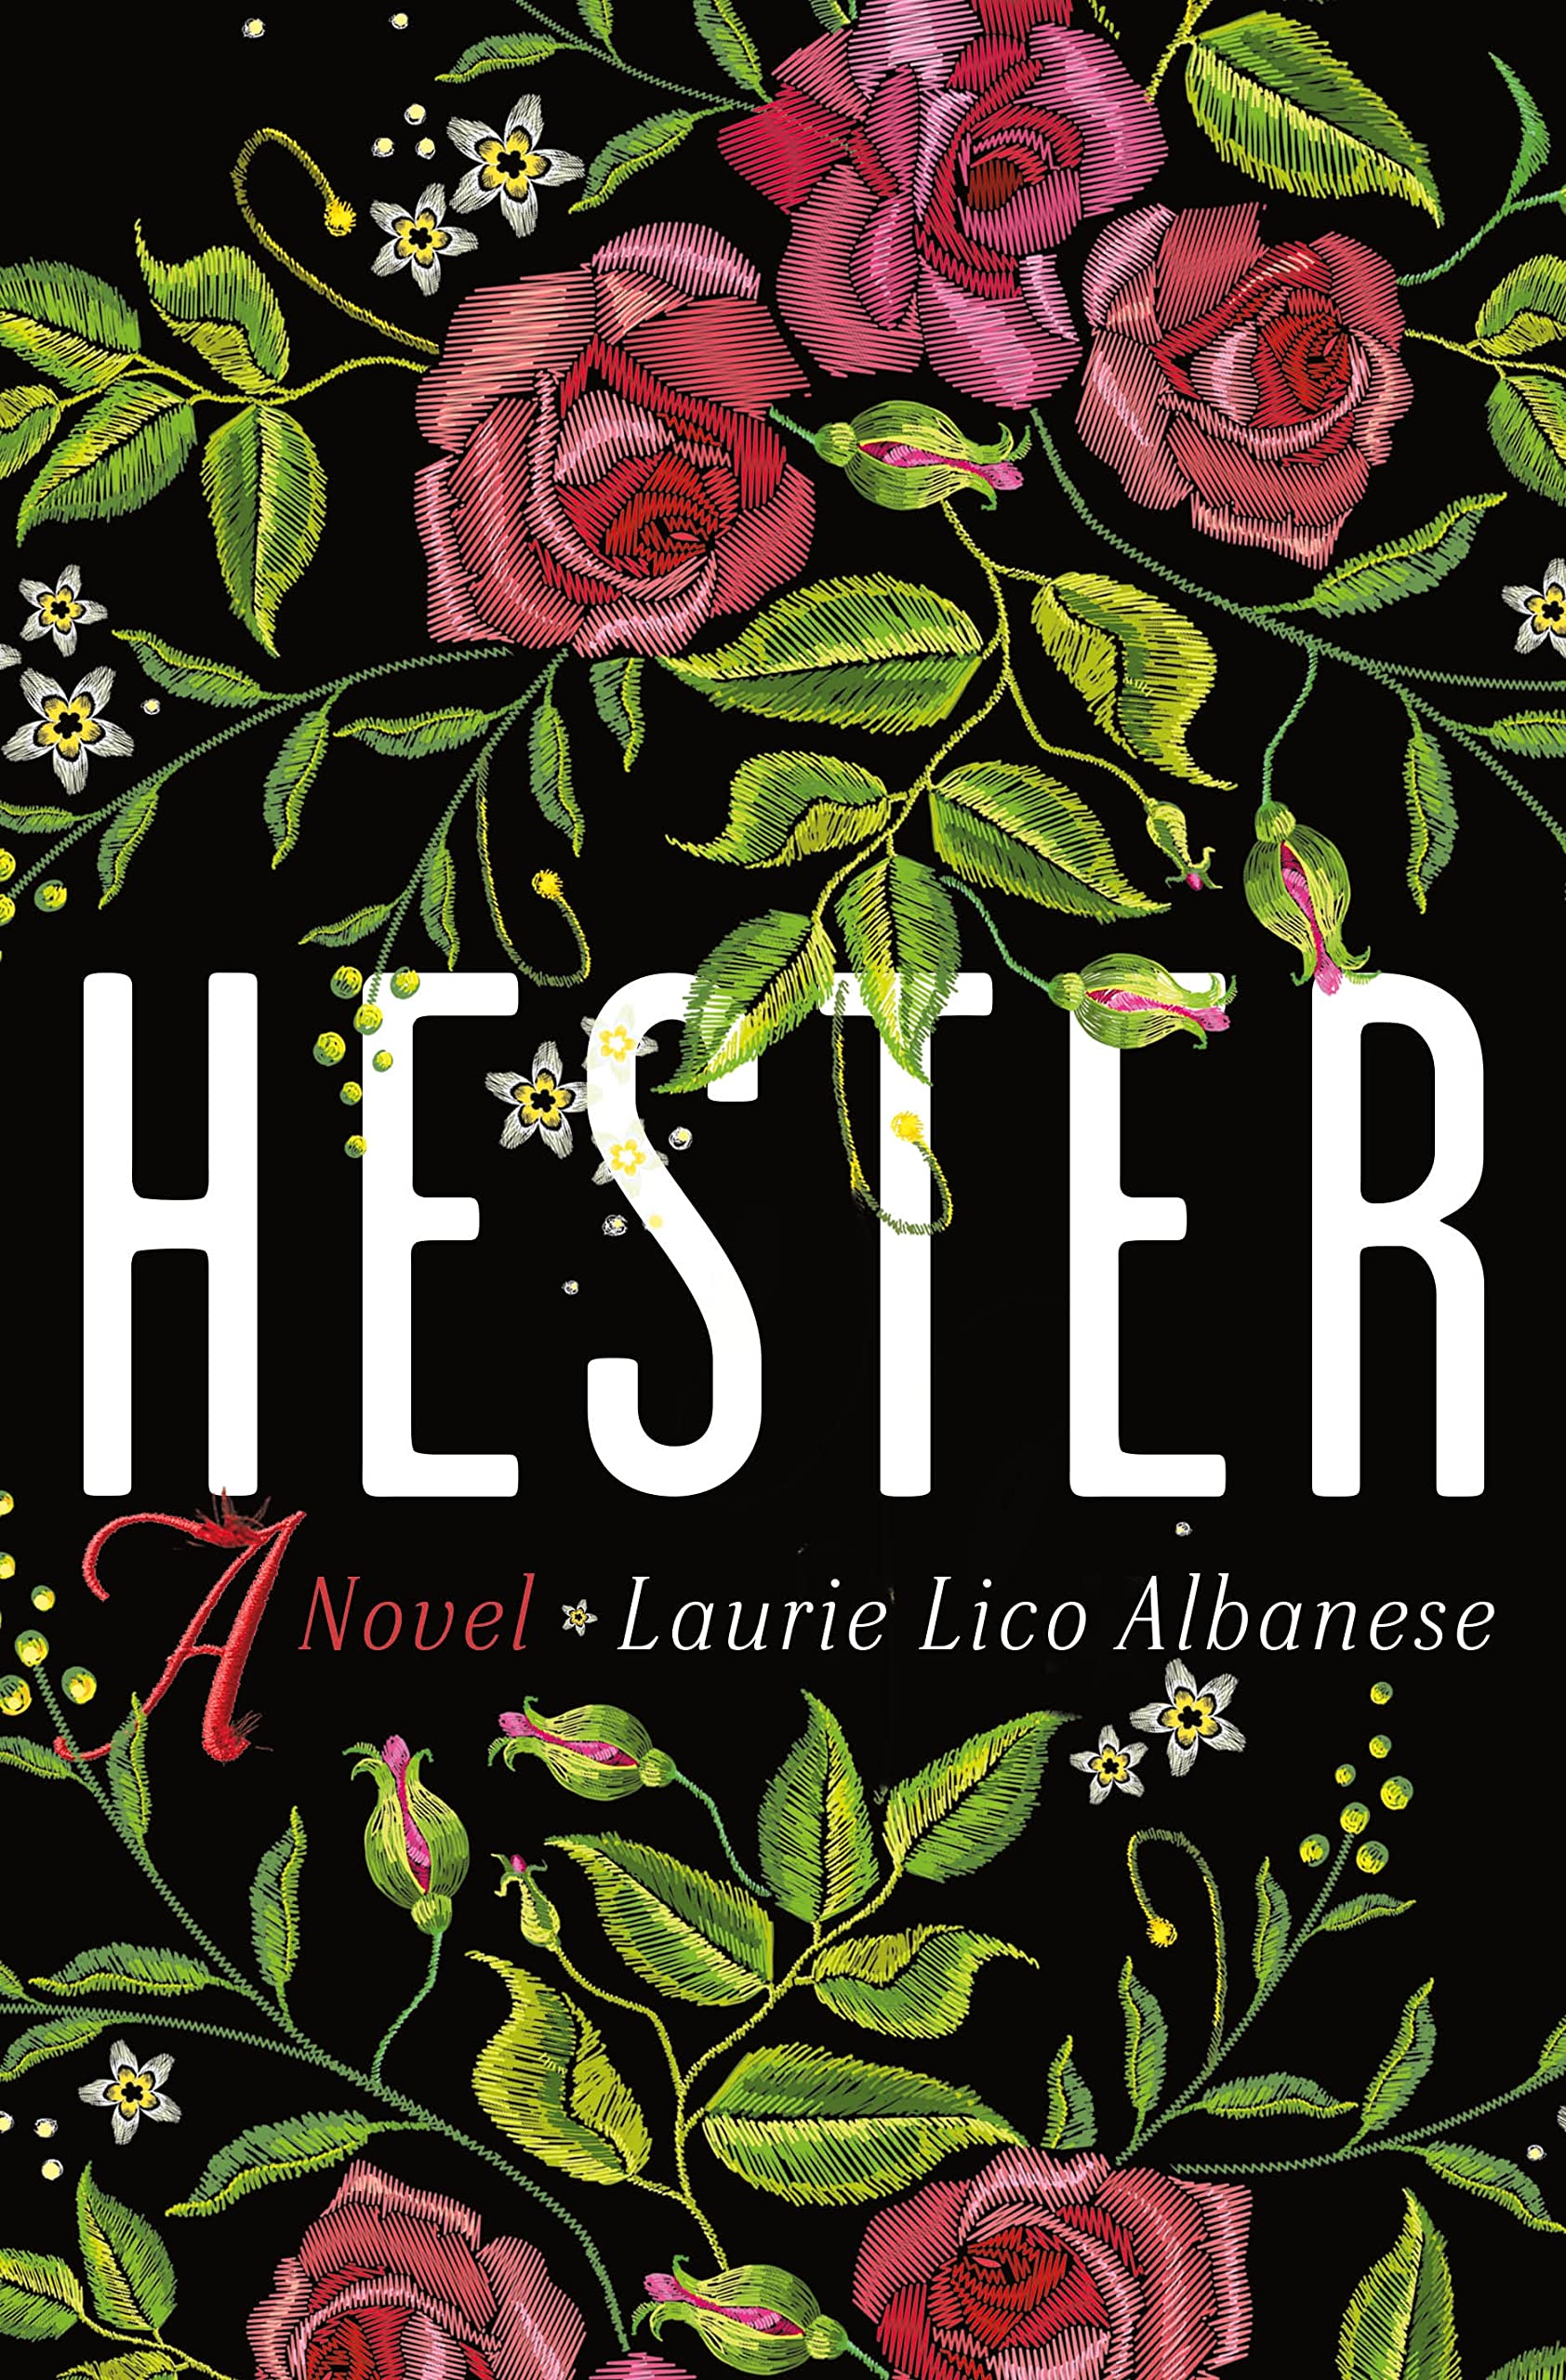 Image for "Hester"